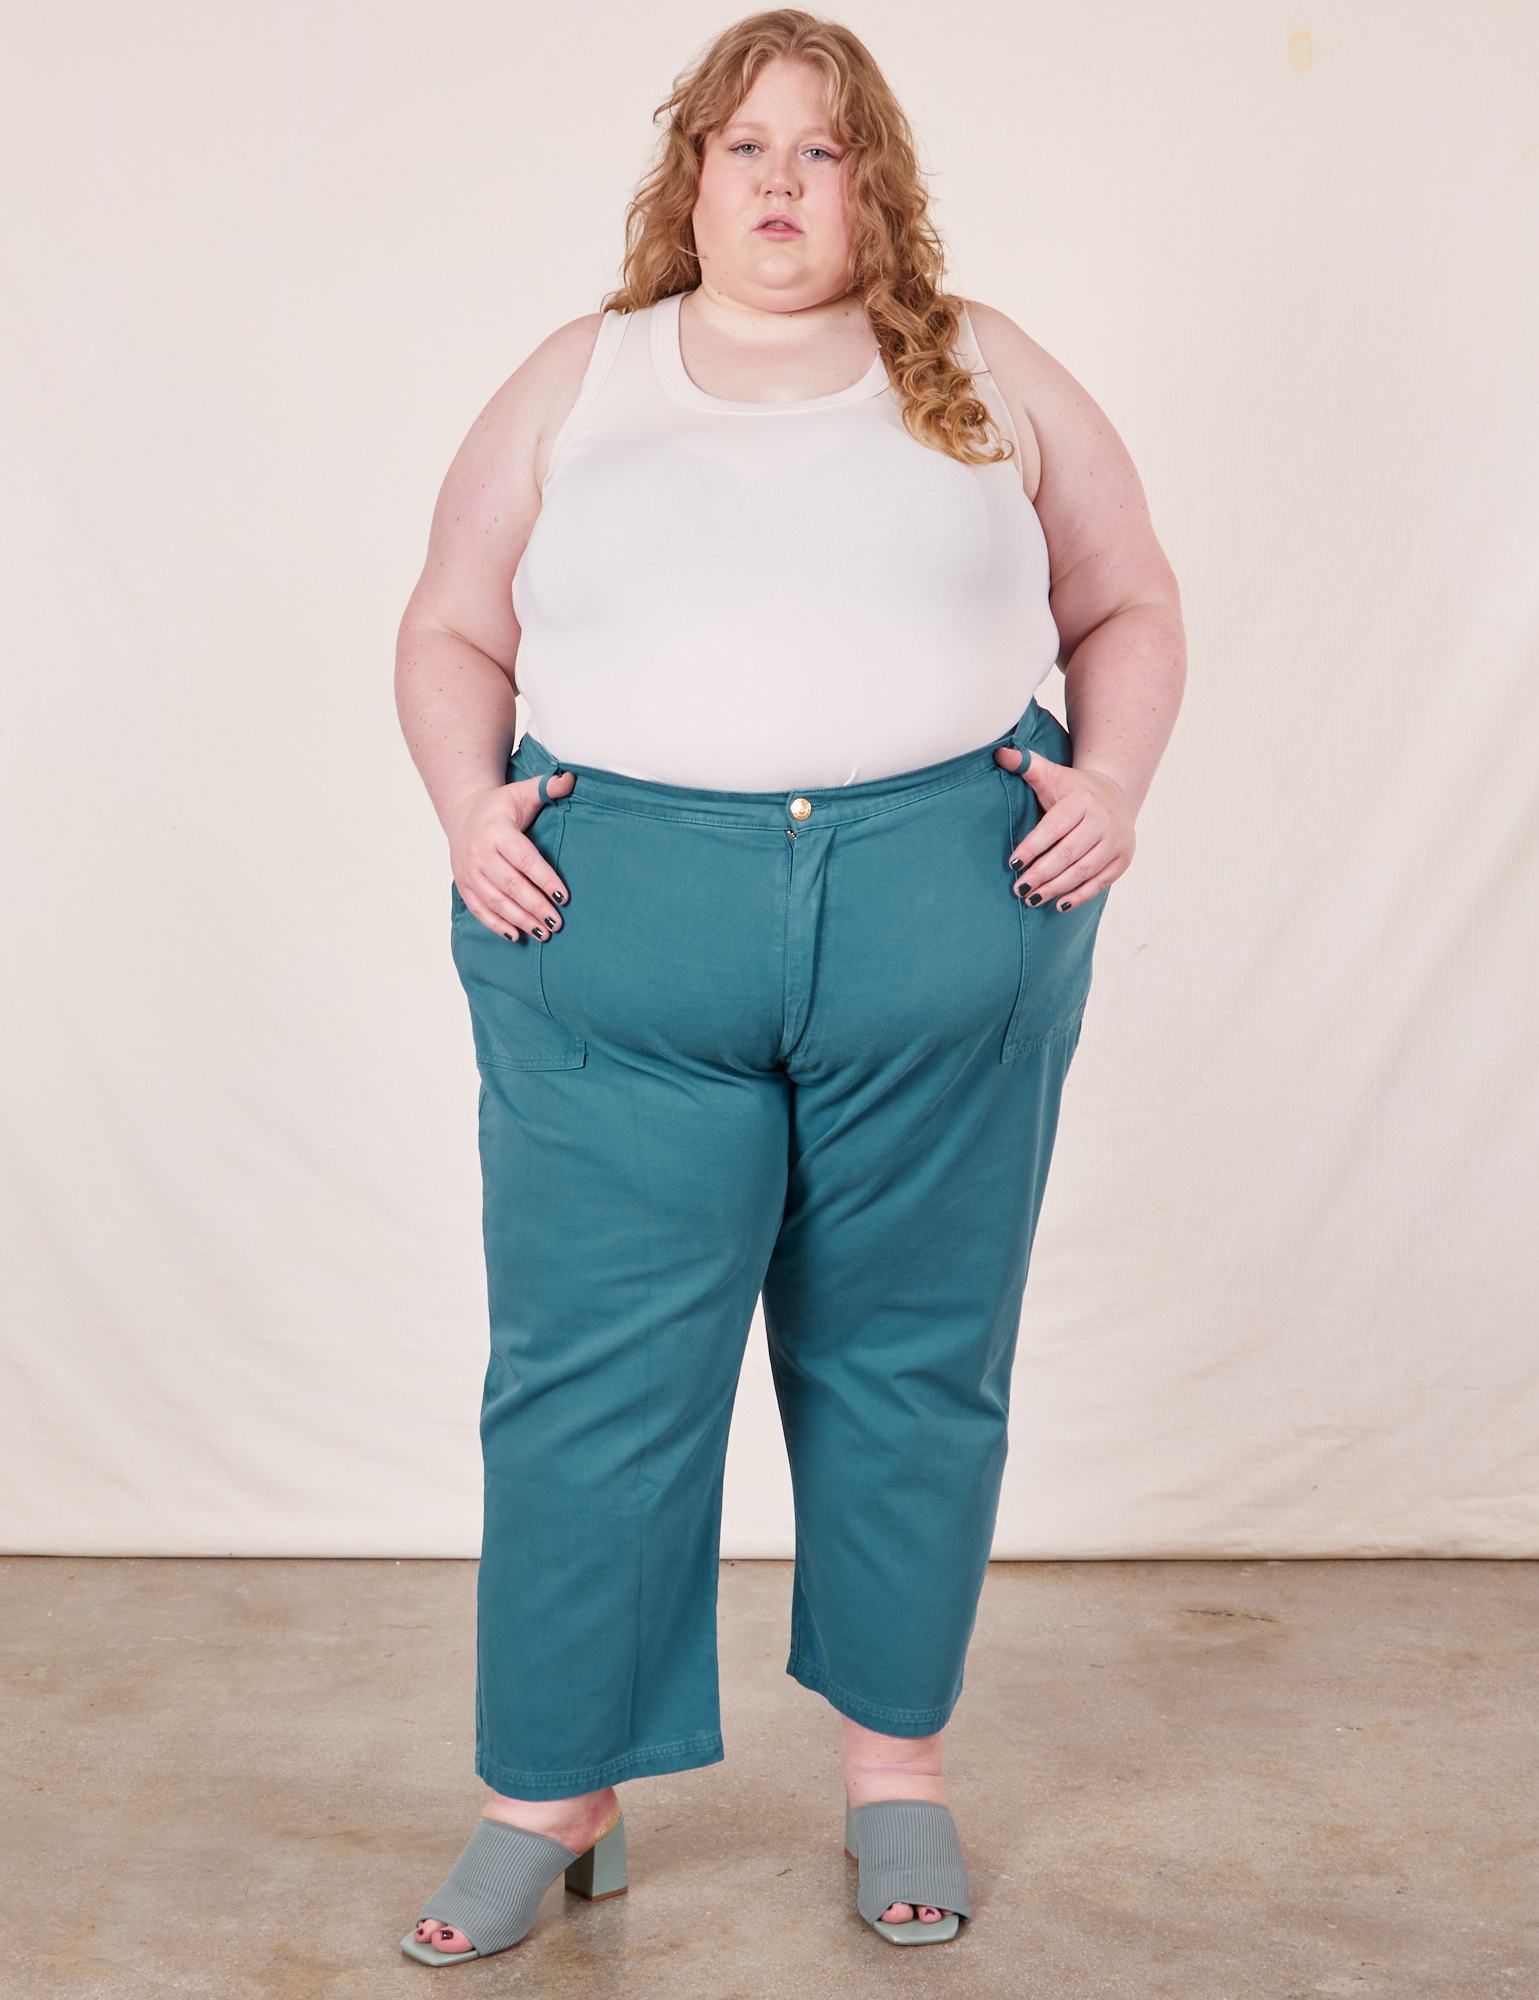 Catie is 5&#39;11&quot; and wearing 5XL Work Pants in Marine Blue paired with Tank Top in vintage tee off-white